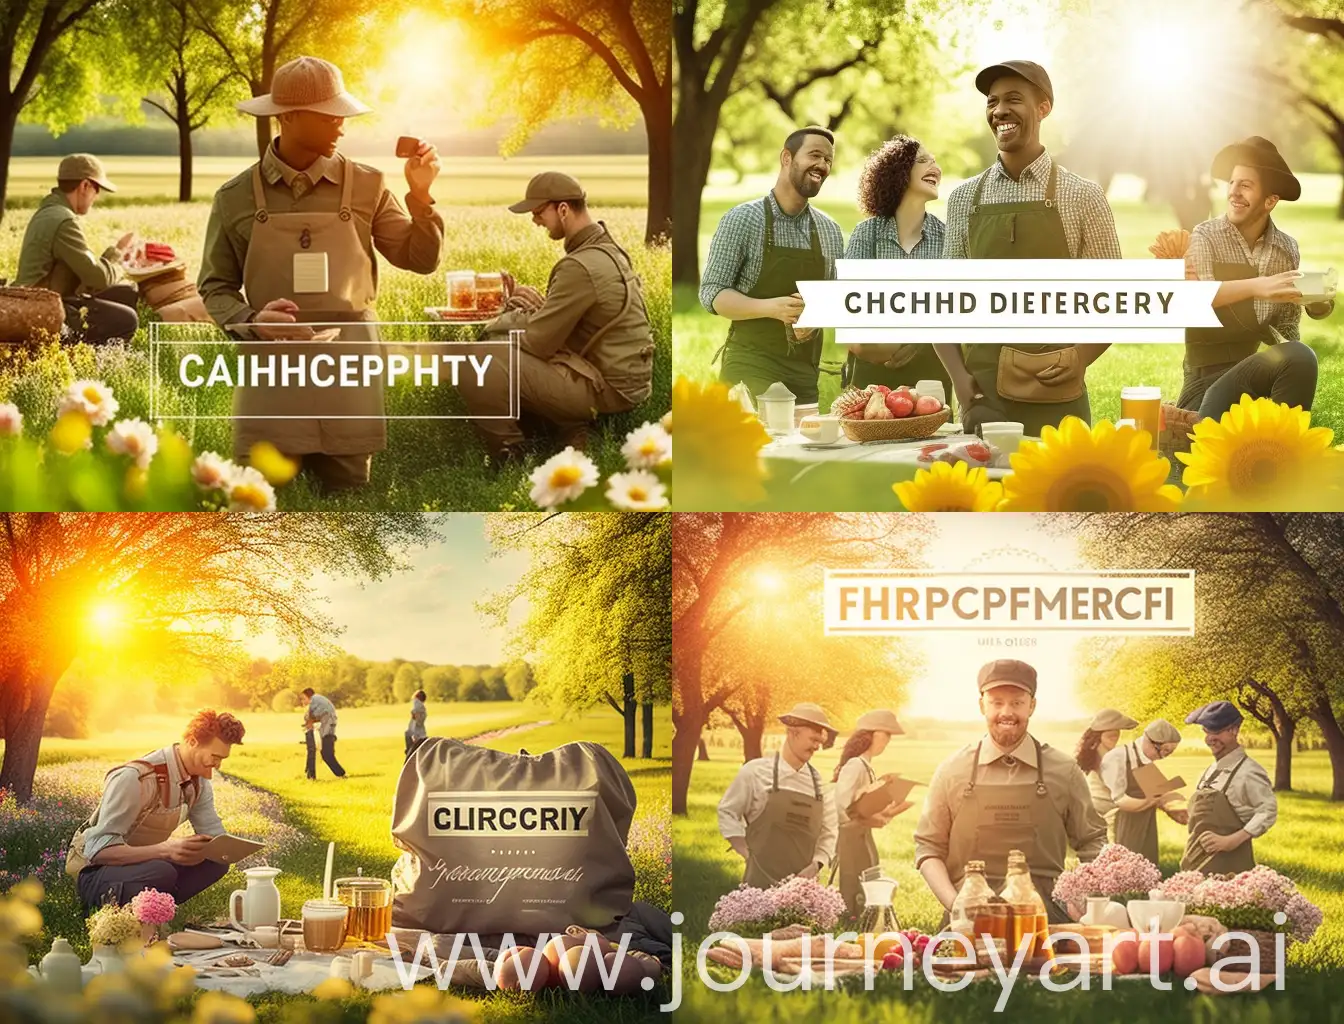 Diverse-Workers-Enjoying-Spring-Picnic-in-Lush-Green-Field